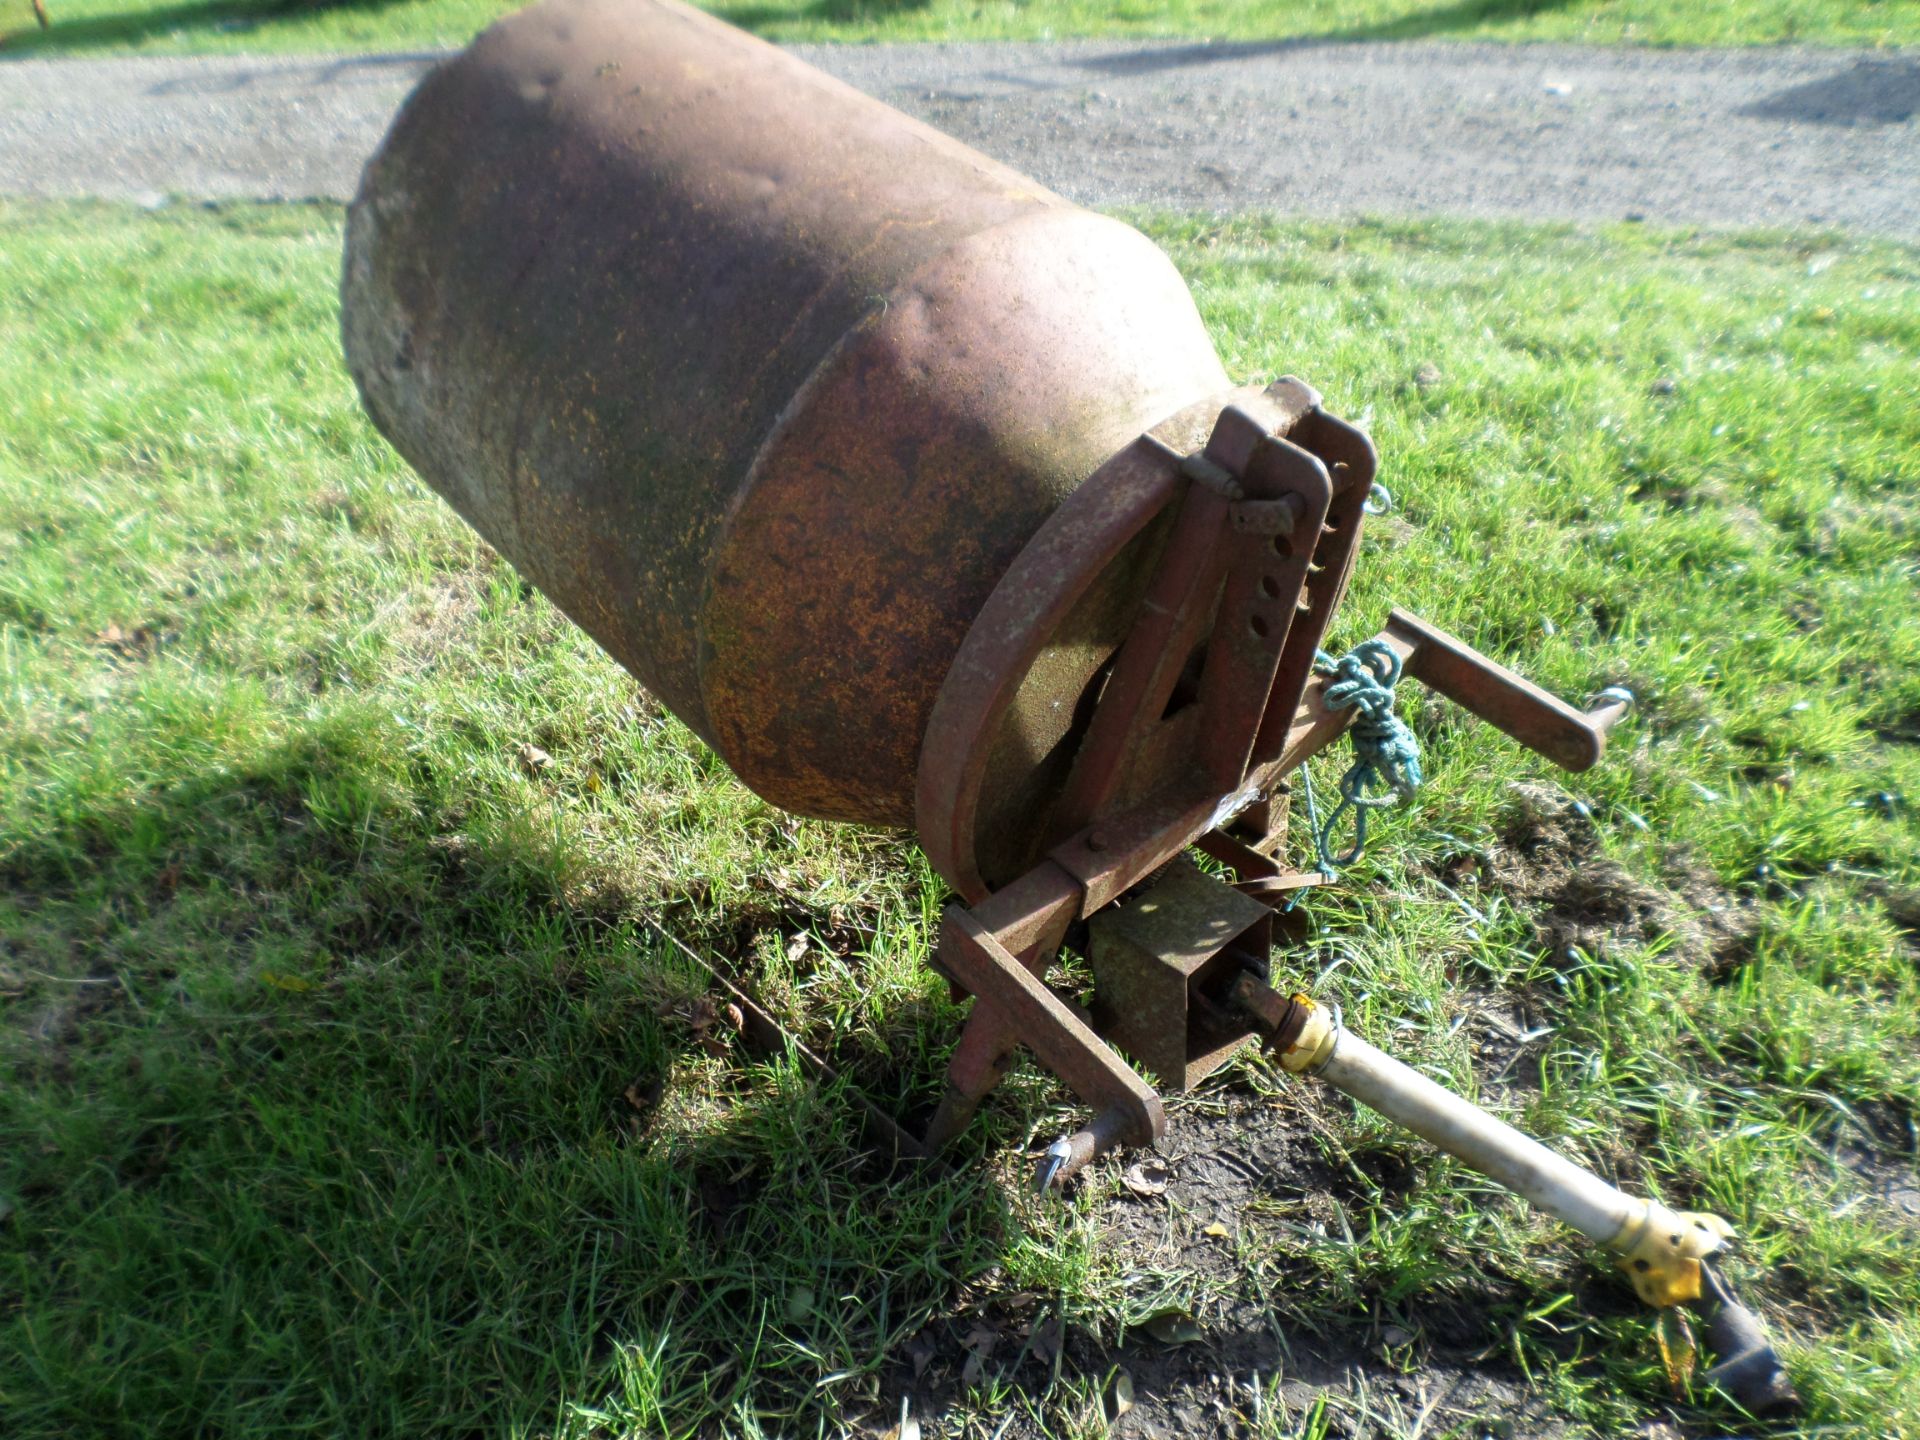 PTO cement mixer, working order, with PTO shaft but guard missing